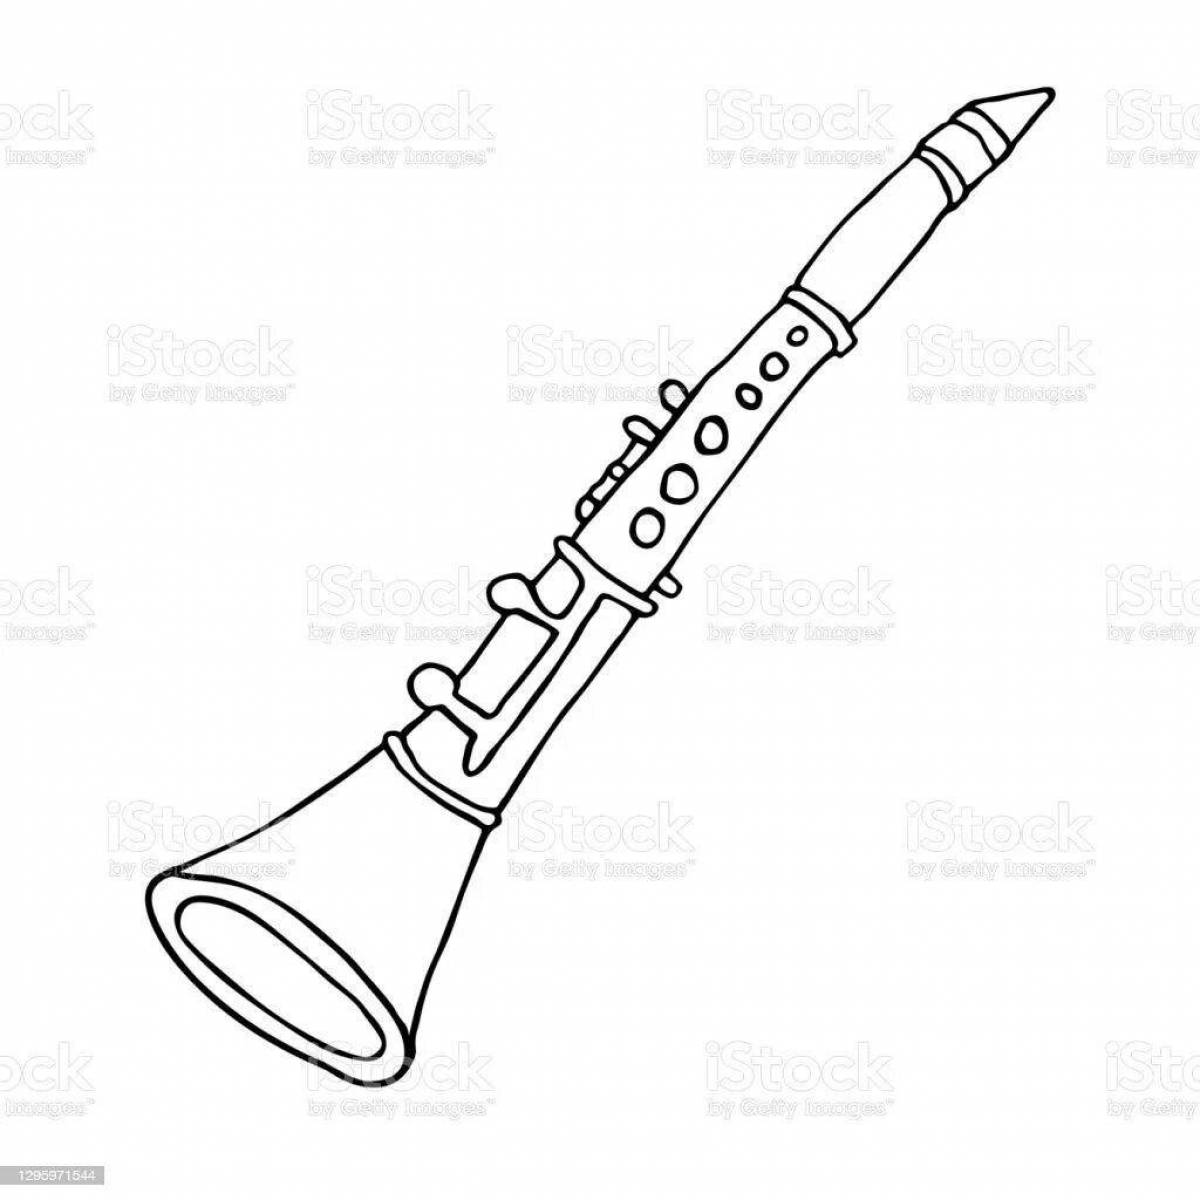 Coloring page adorable musical instrument flute